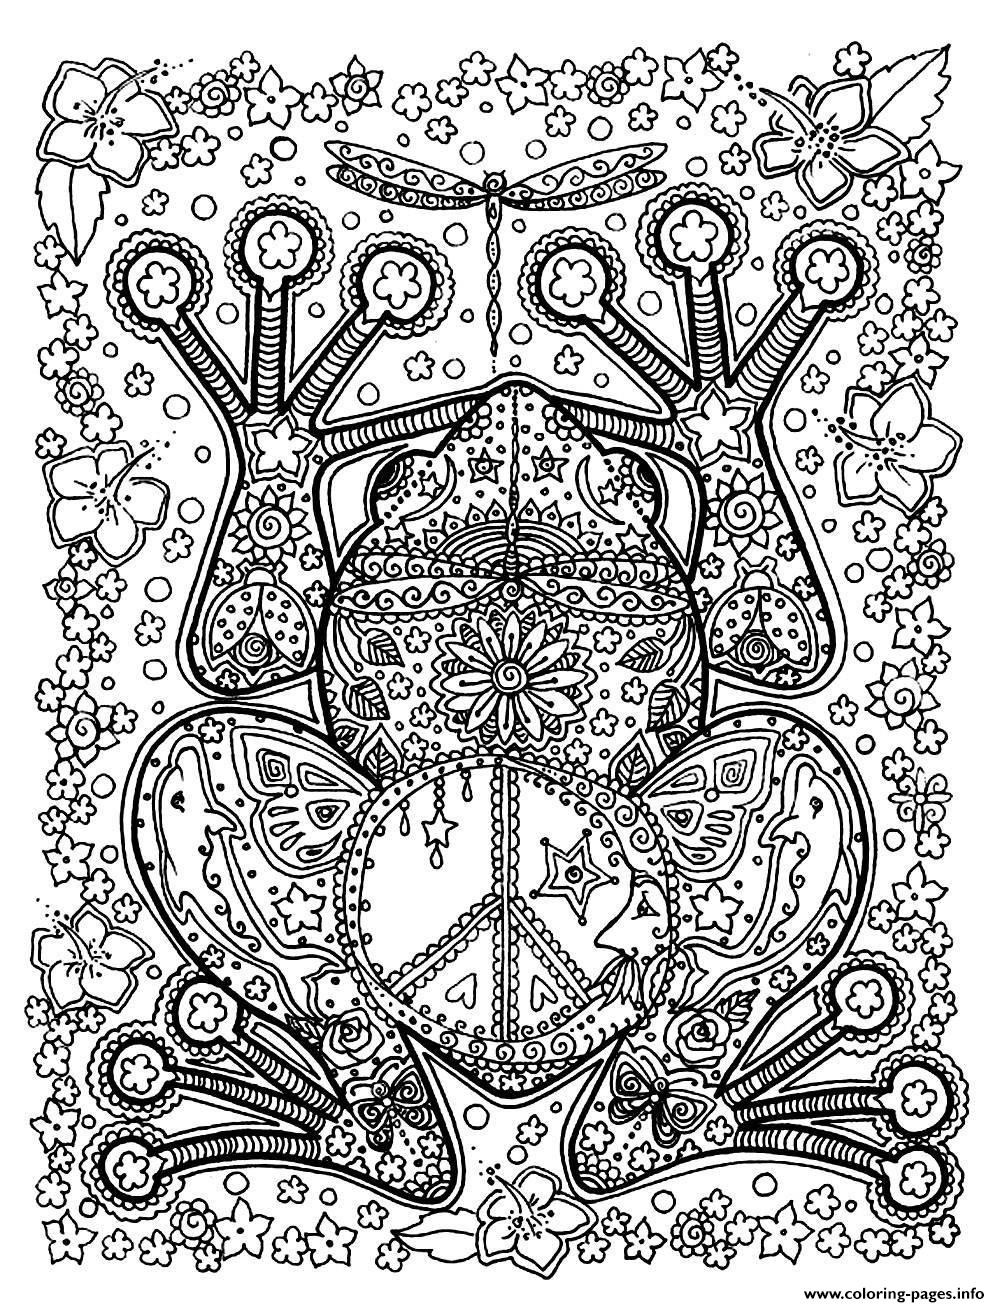 Large Print Coloring Pages For Adults
 Adult Animals Big Frog Coloring Pages Printable